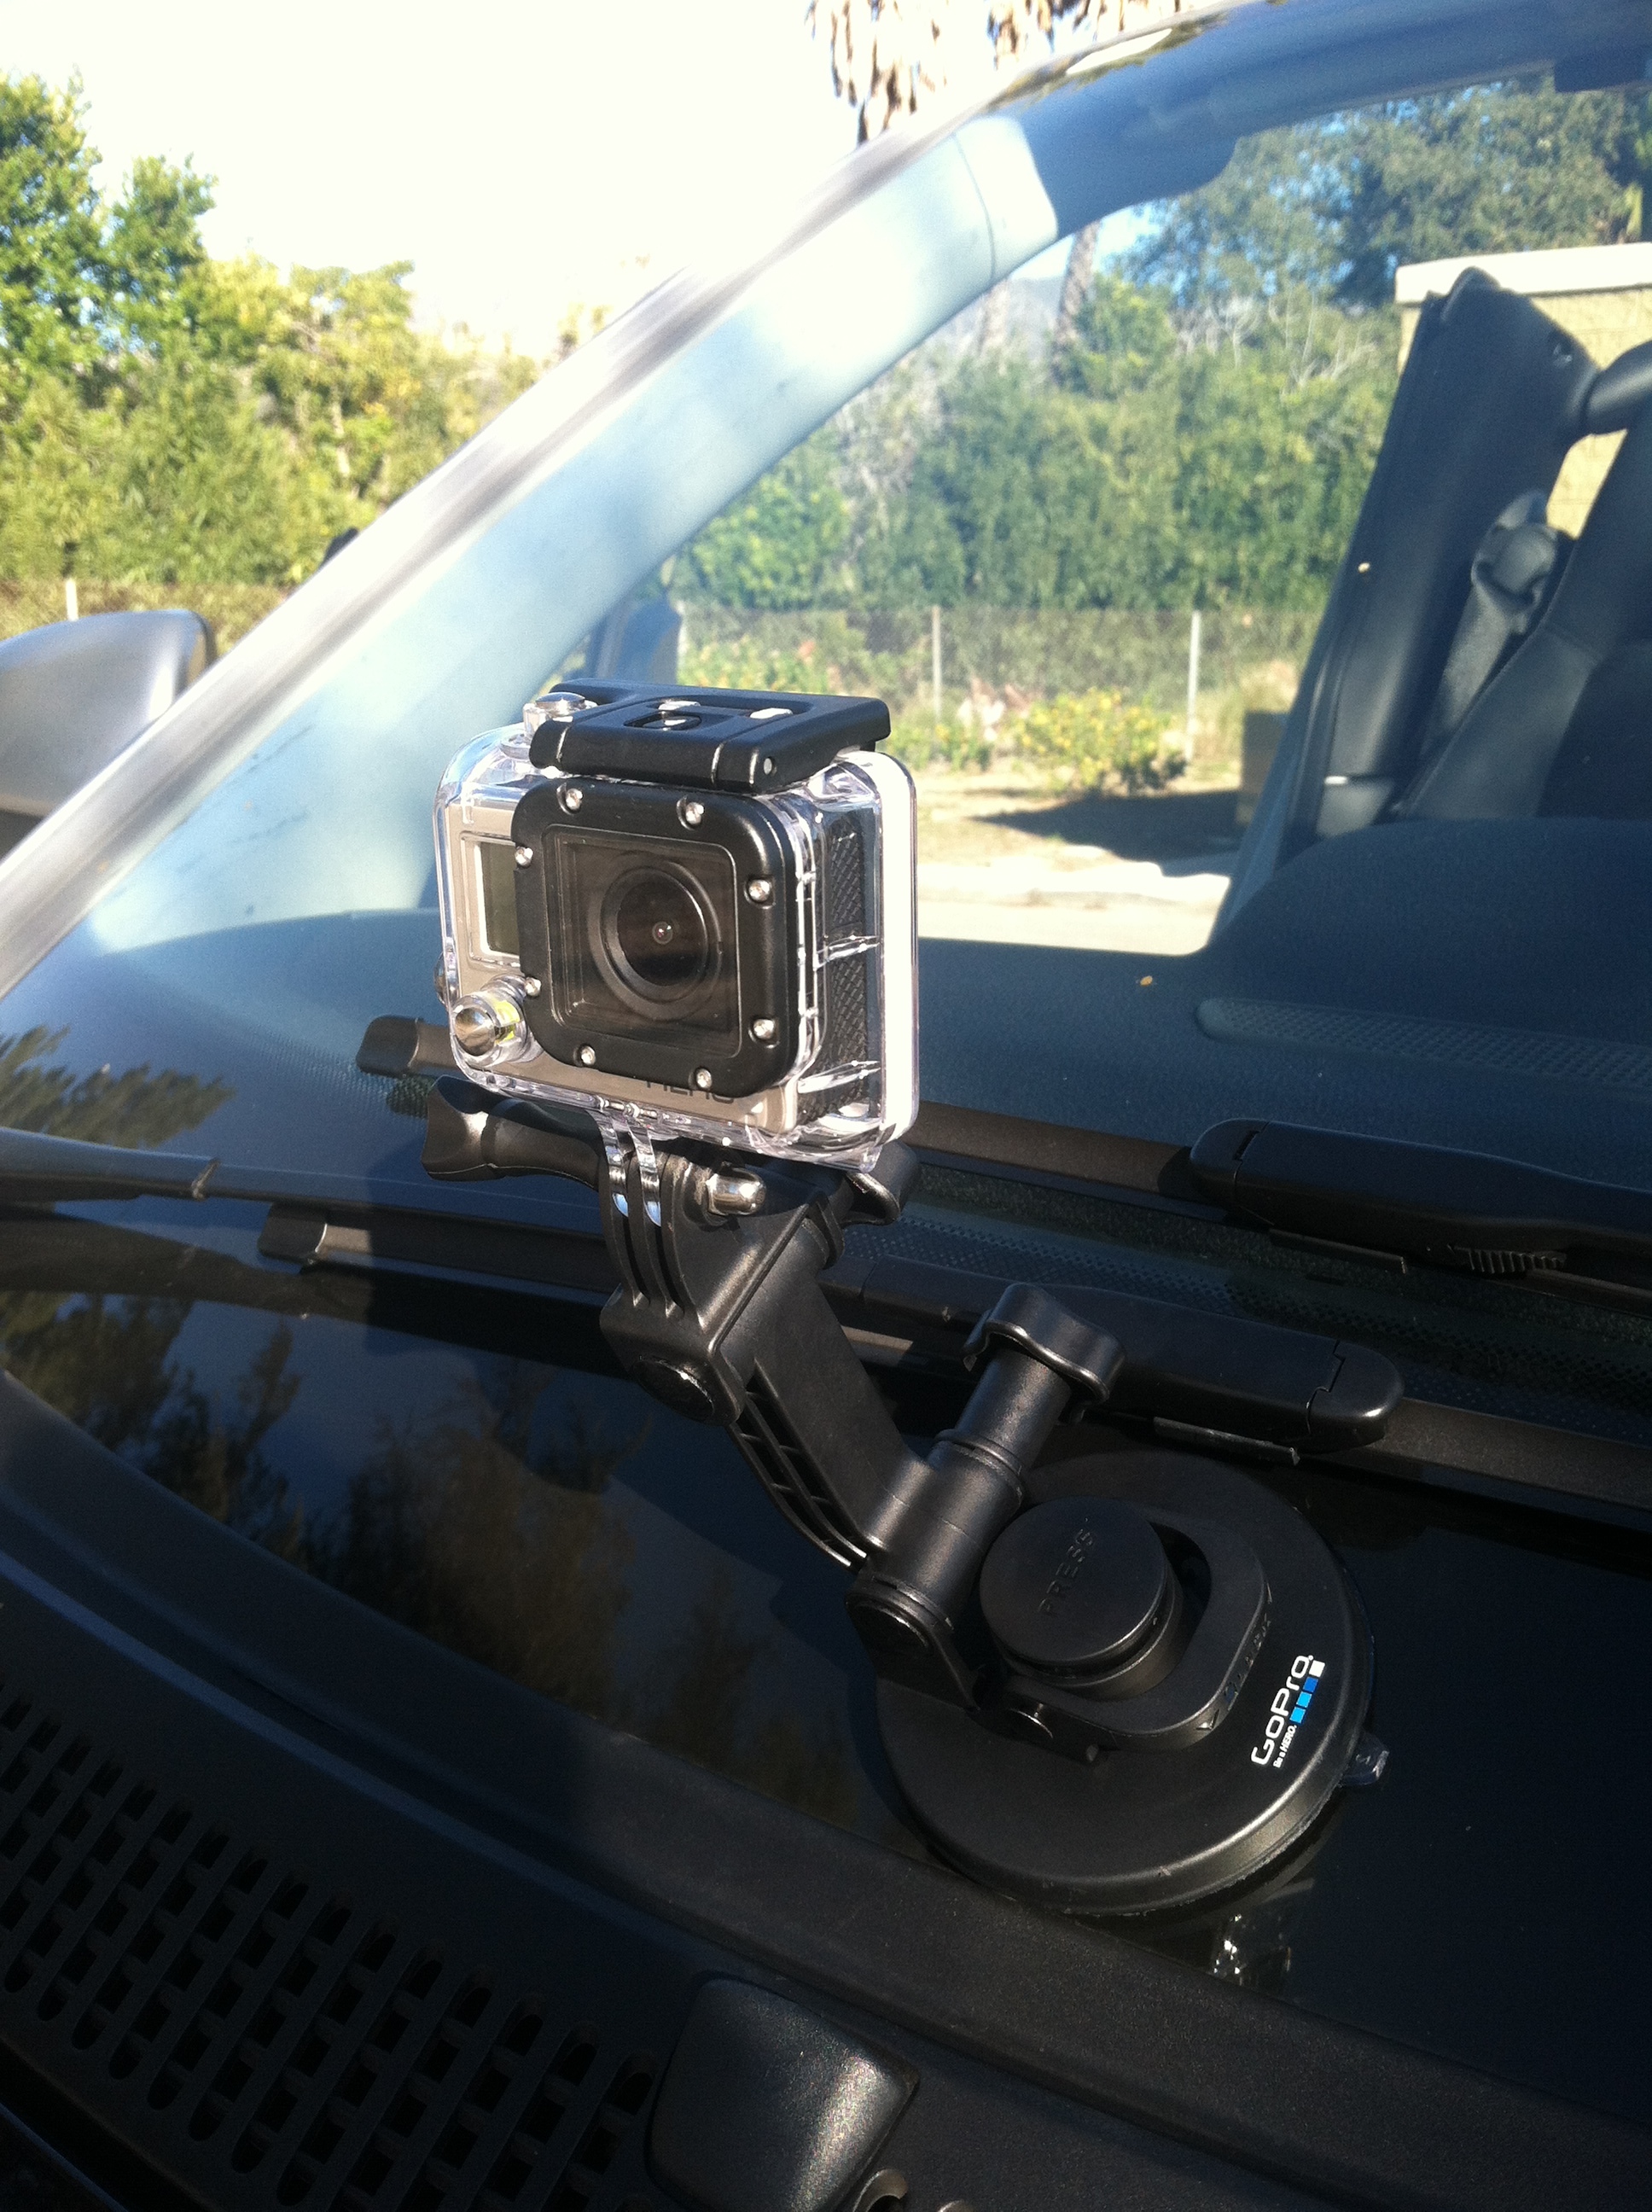  And finally, the GoPro is added. 